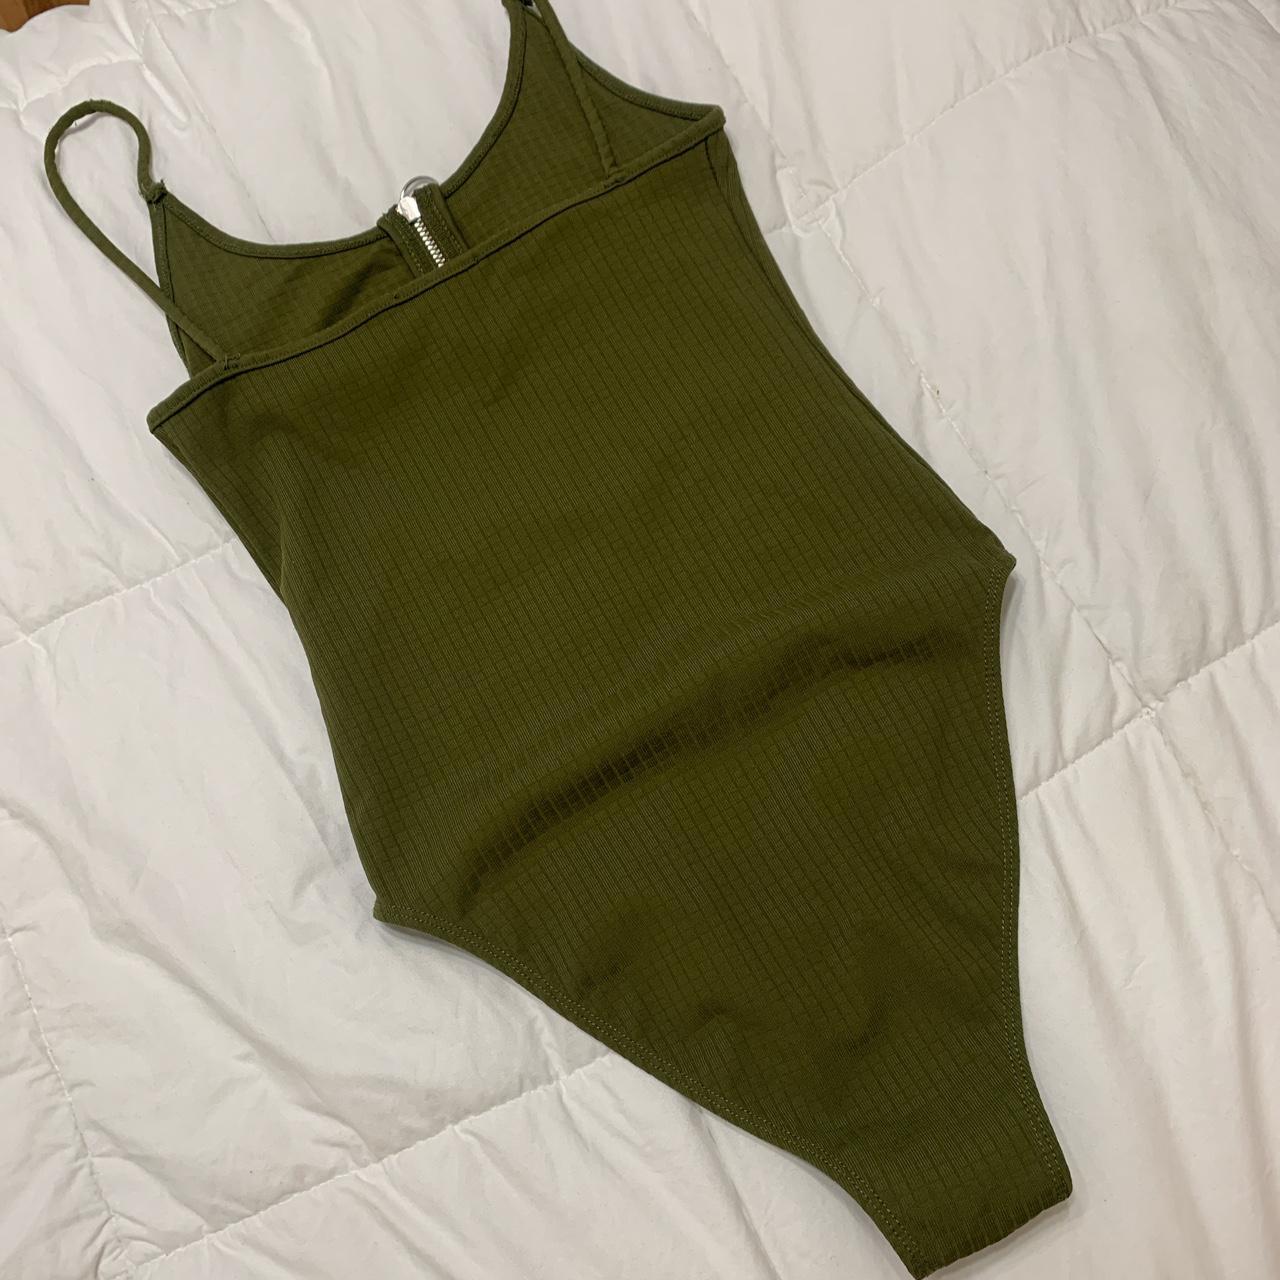 Product Image 4 - TOPSHOP ARMY GREEN BODYSUIT✨💛US 4

Cute,